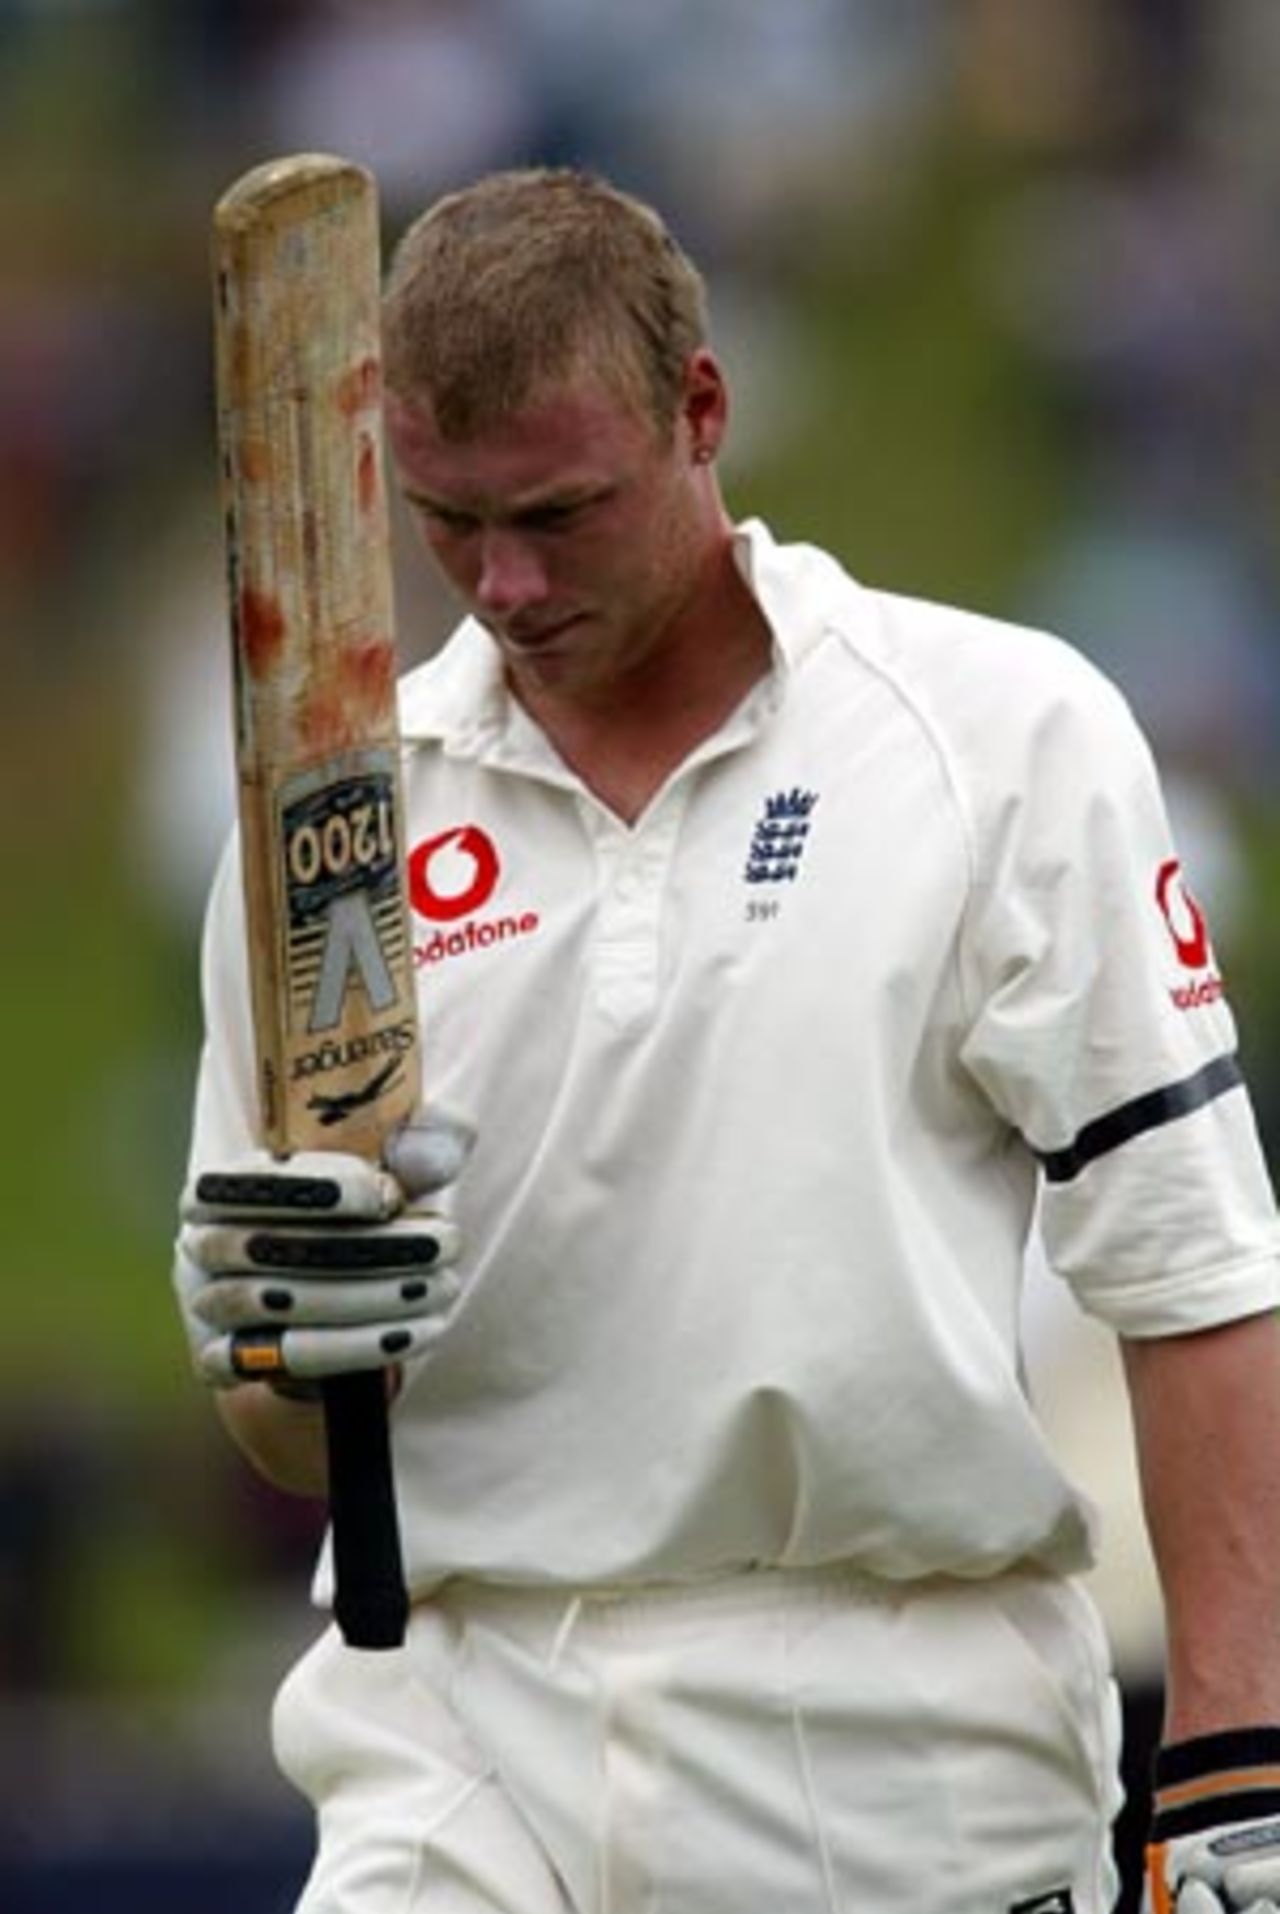 England batsman Andrew Flintoff raises his bat to acknowledge the crowd after being dismissed for 75 in his second innings. 2nd Test: New Zealand v England at Basin Reserve, Wellington, 21-25 March 2002 (25 March 2002).